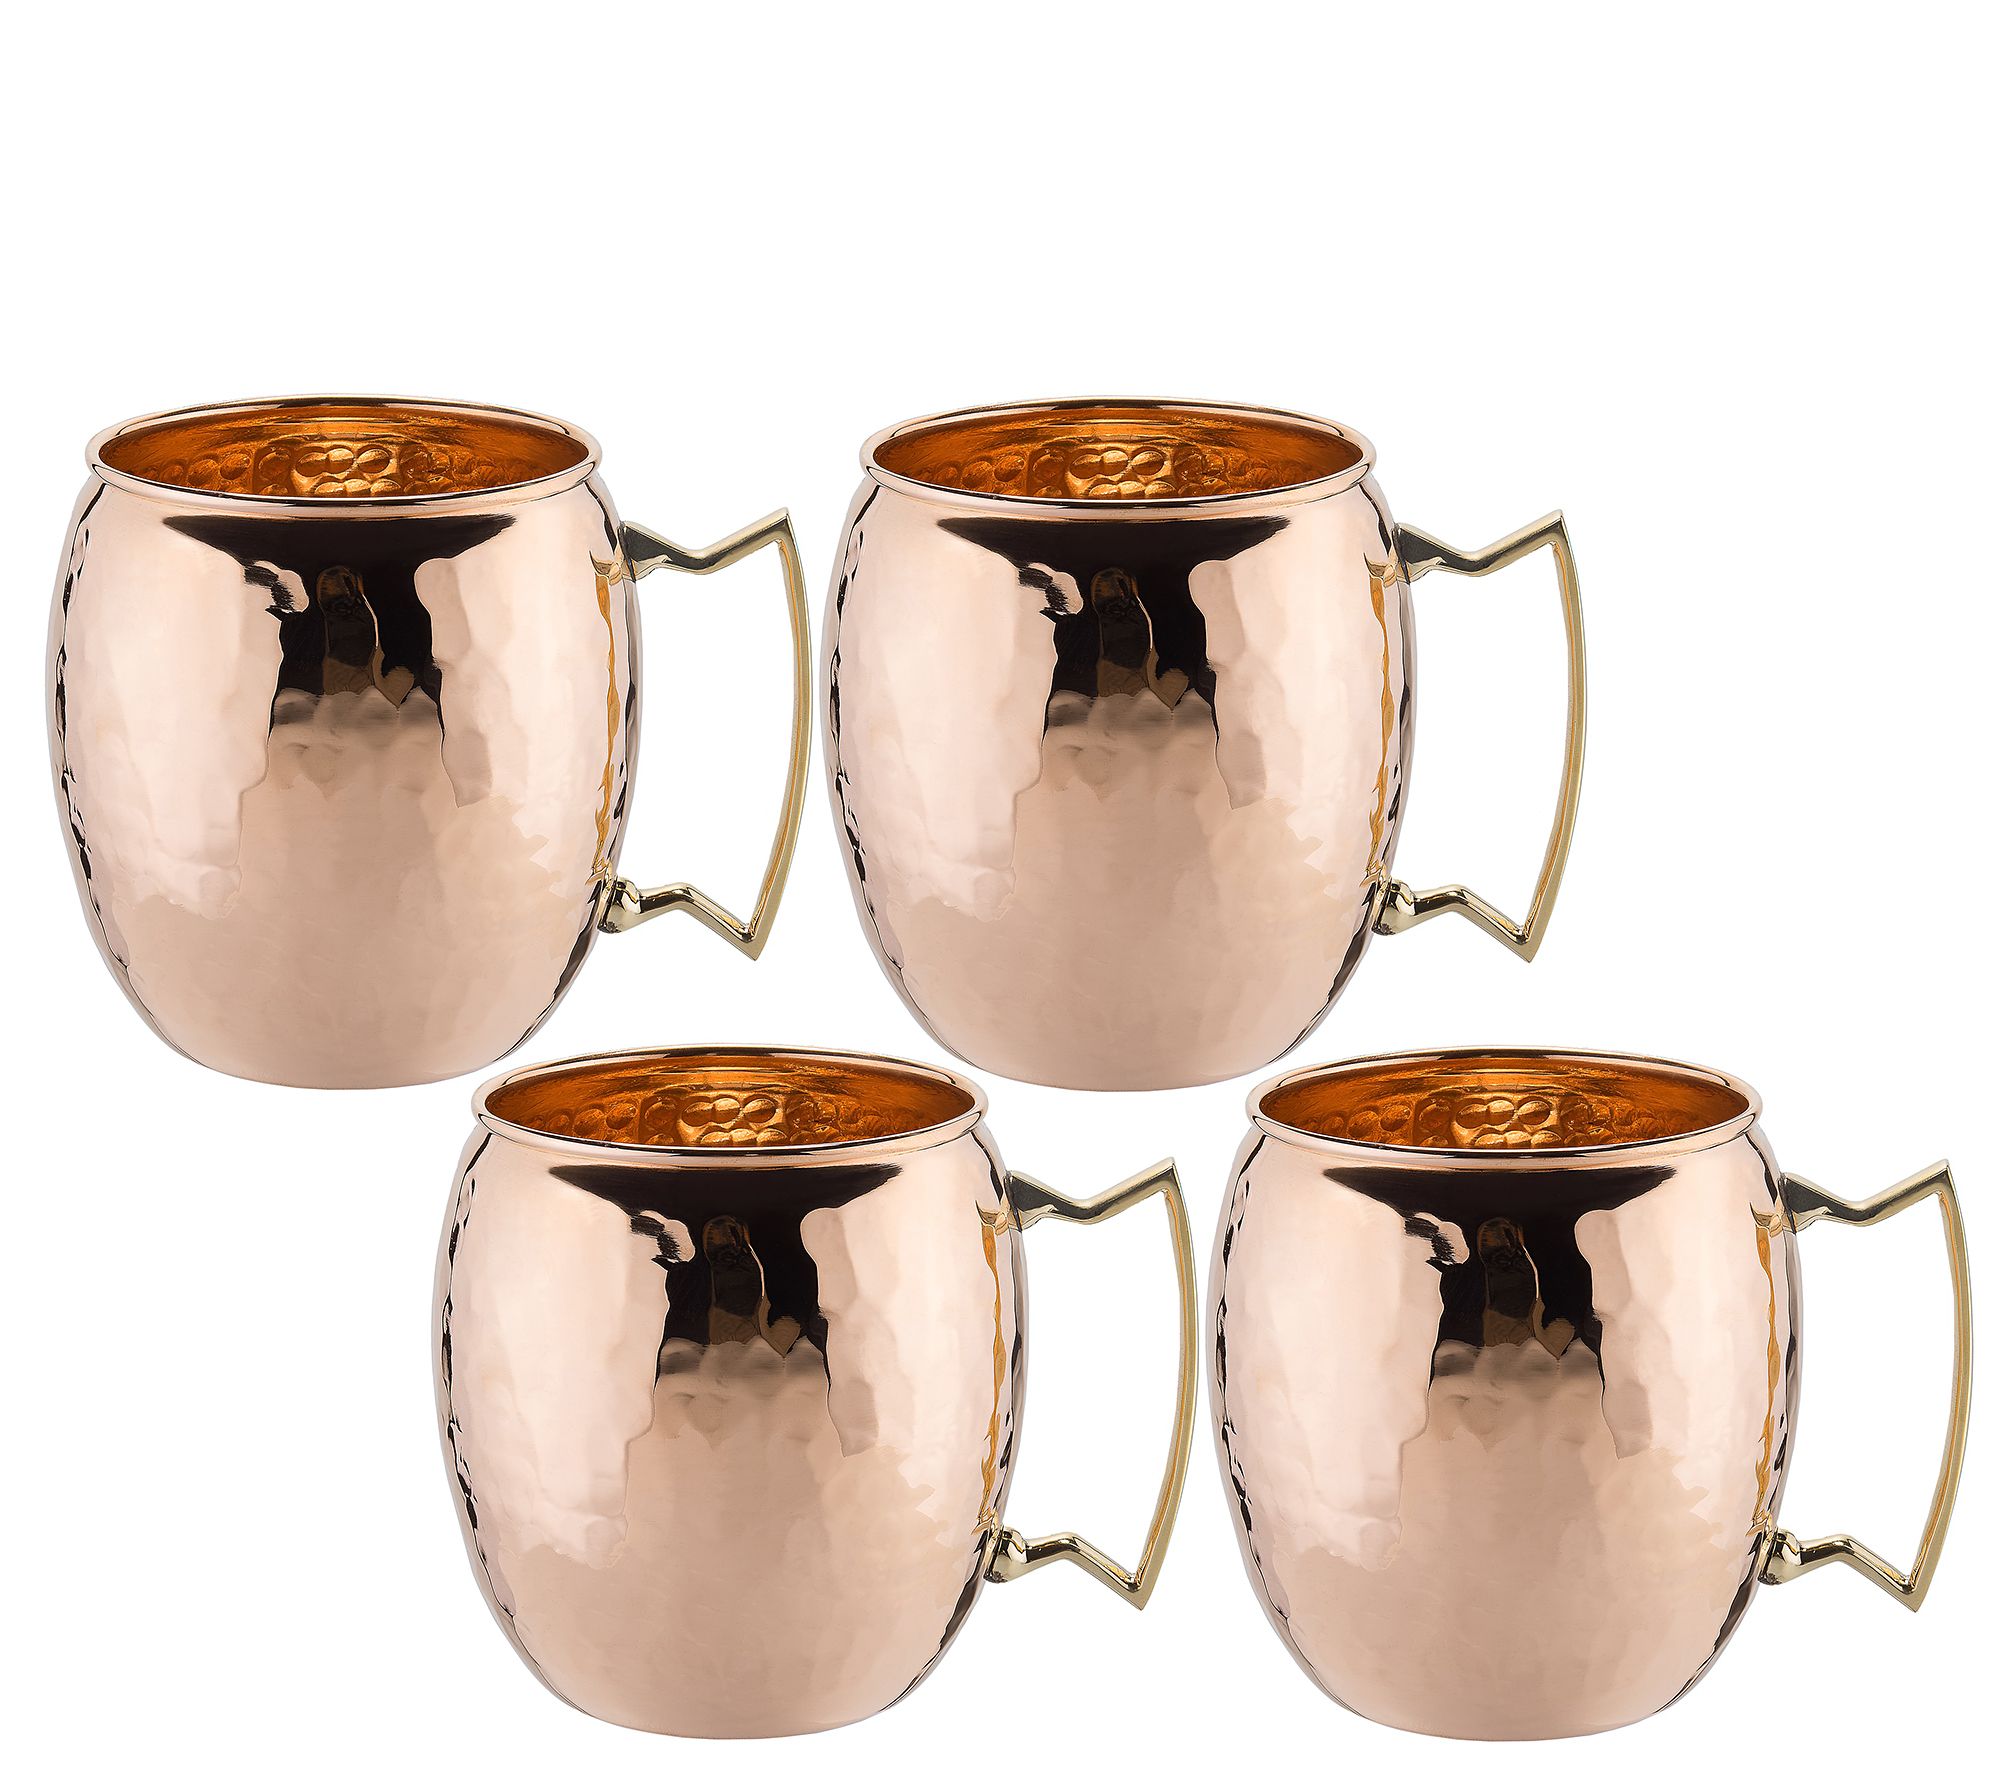 14-Ounce Old Dutch Straight Sided Moscow Mule Mug Set of 4 